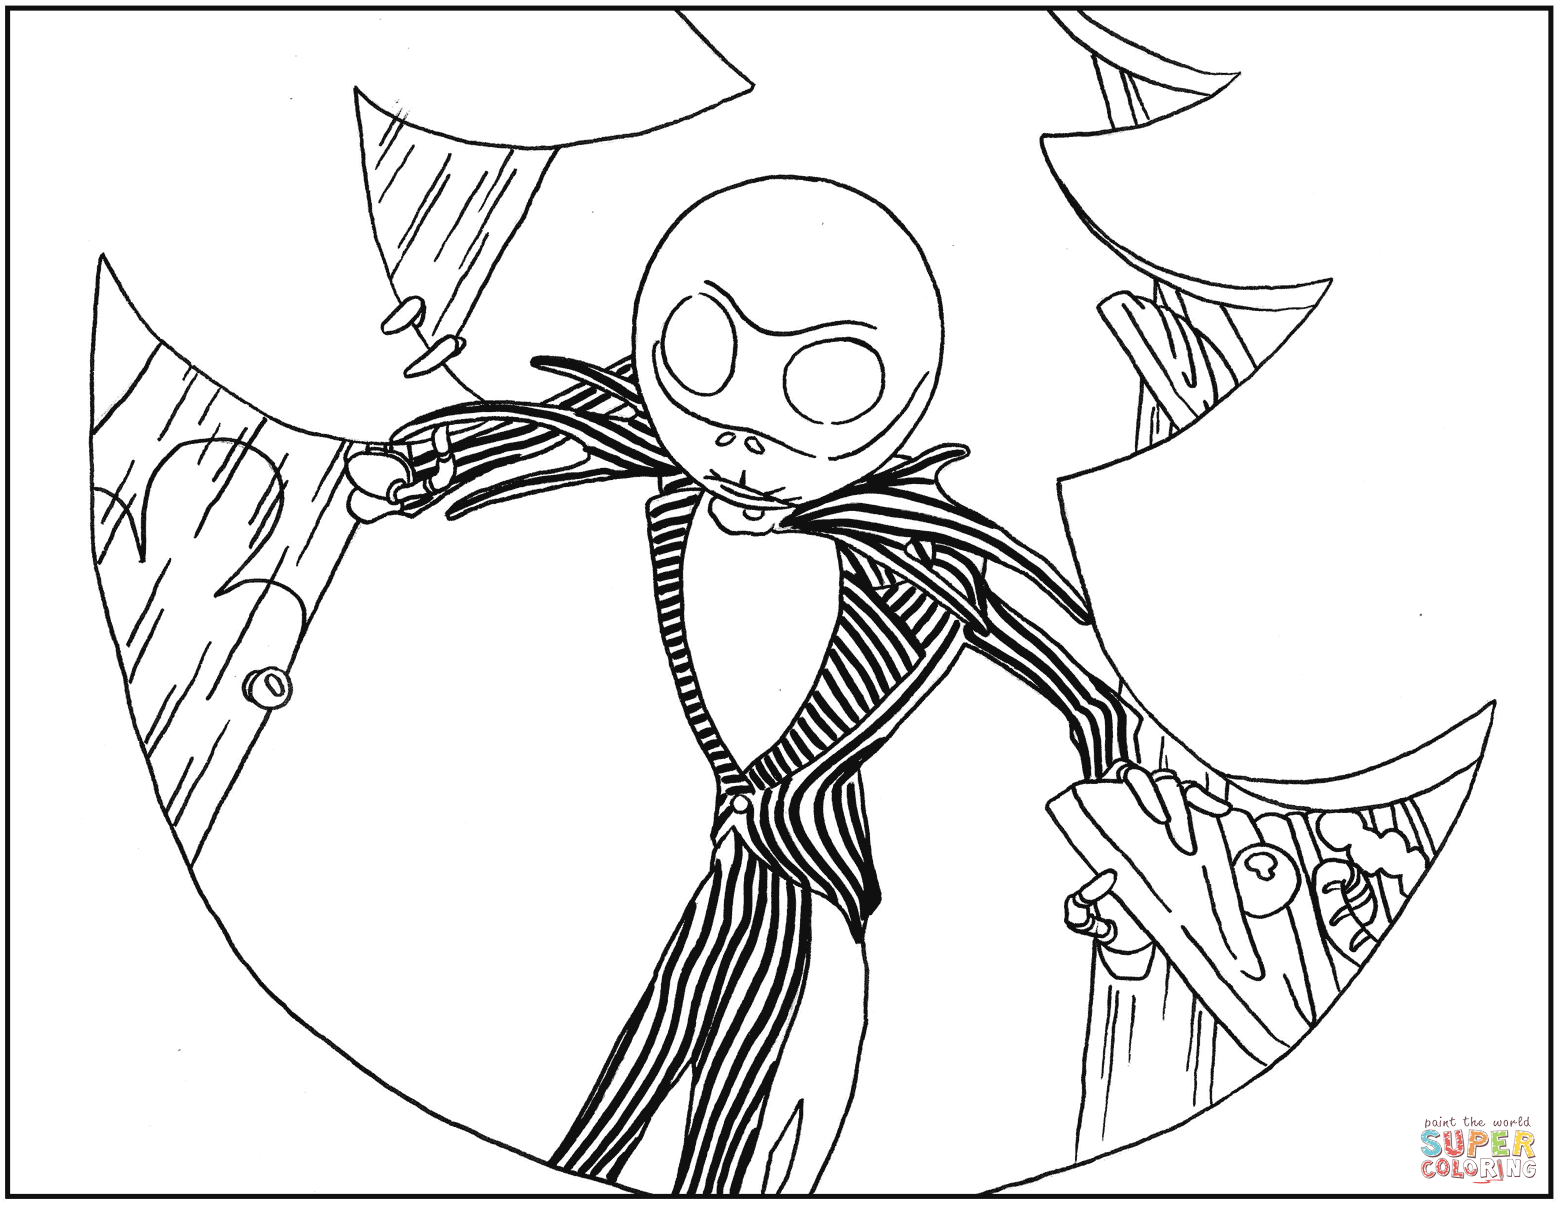 Jack skellington from nightmare before christmas coloring page free printable coloring pages